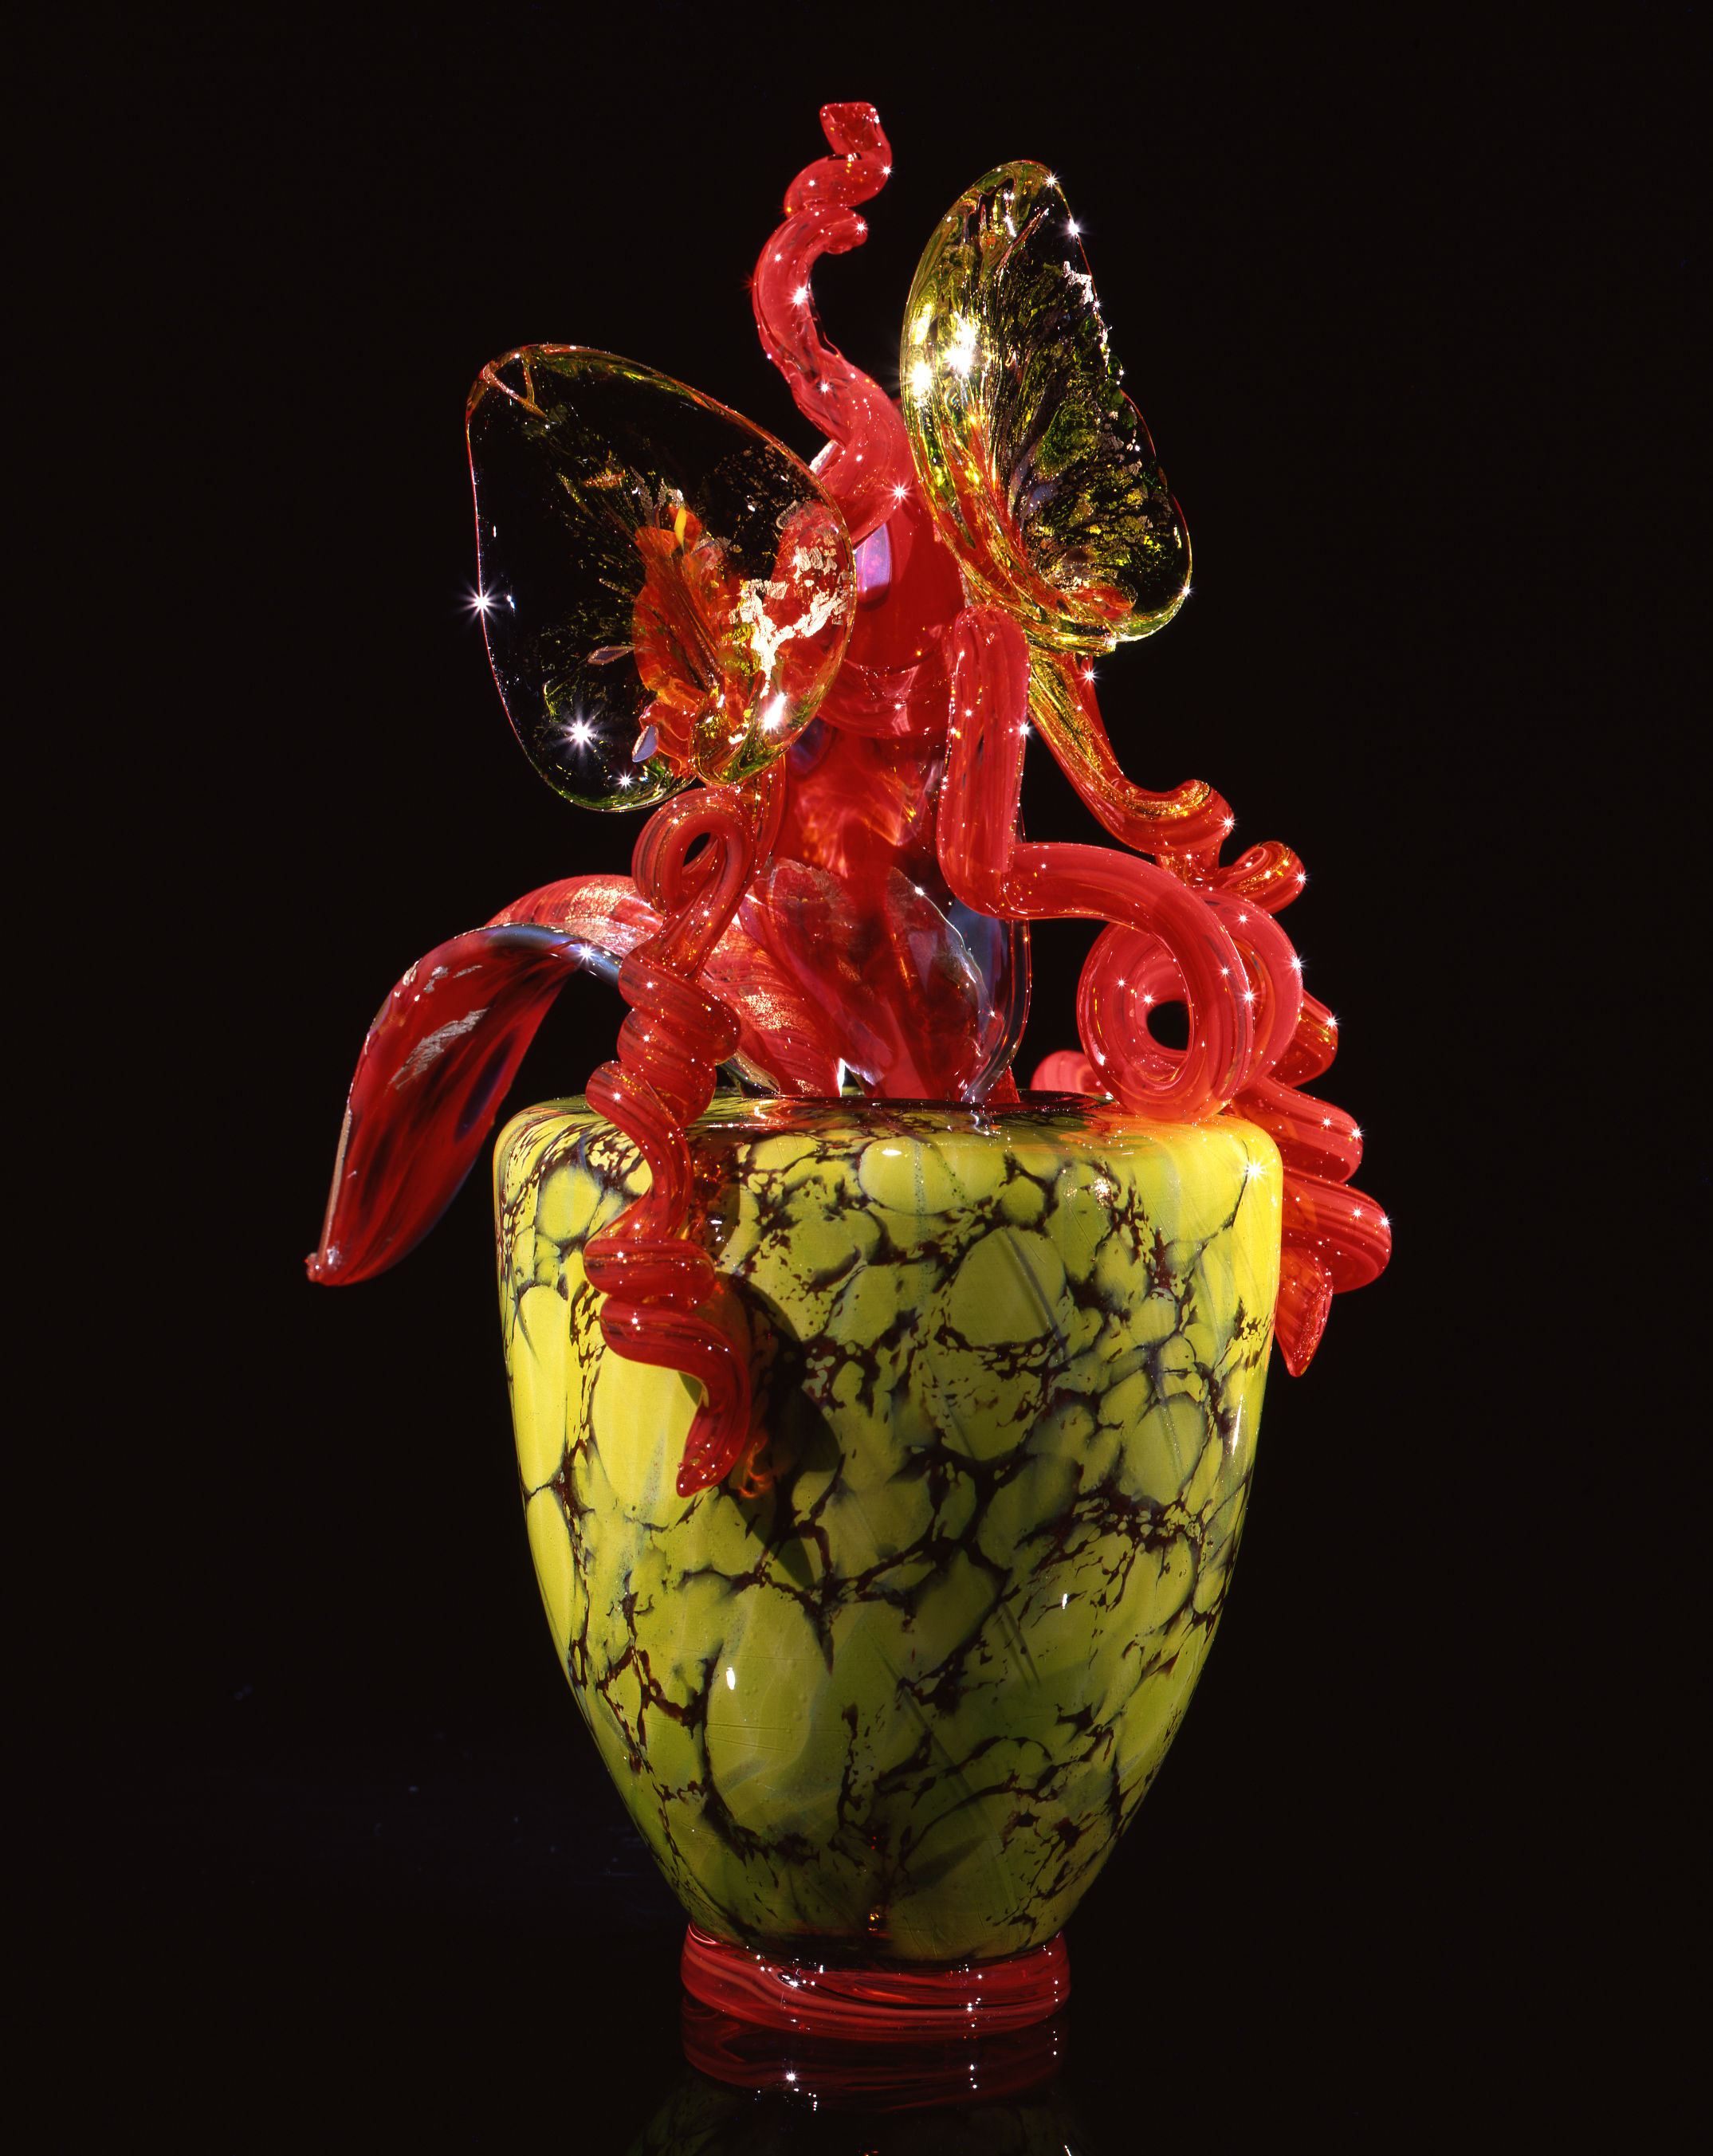  Dale Chihuly,&nbsp; Chartreuse Piccolo Venetian with Red Flowers&nbsp; (1993, glass, 11 x 8 x 7&nbsp;inches) 